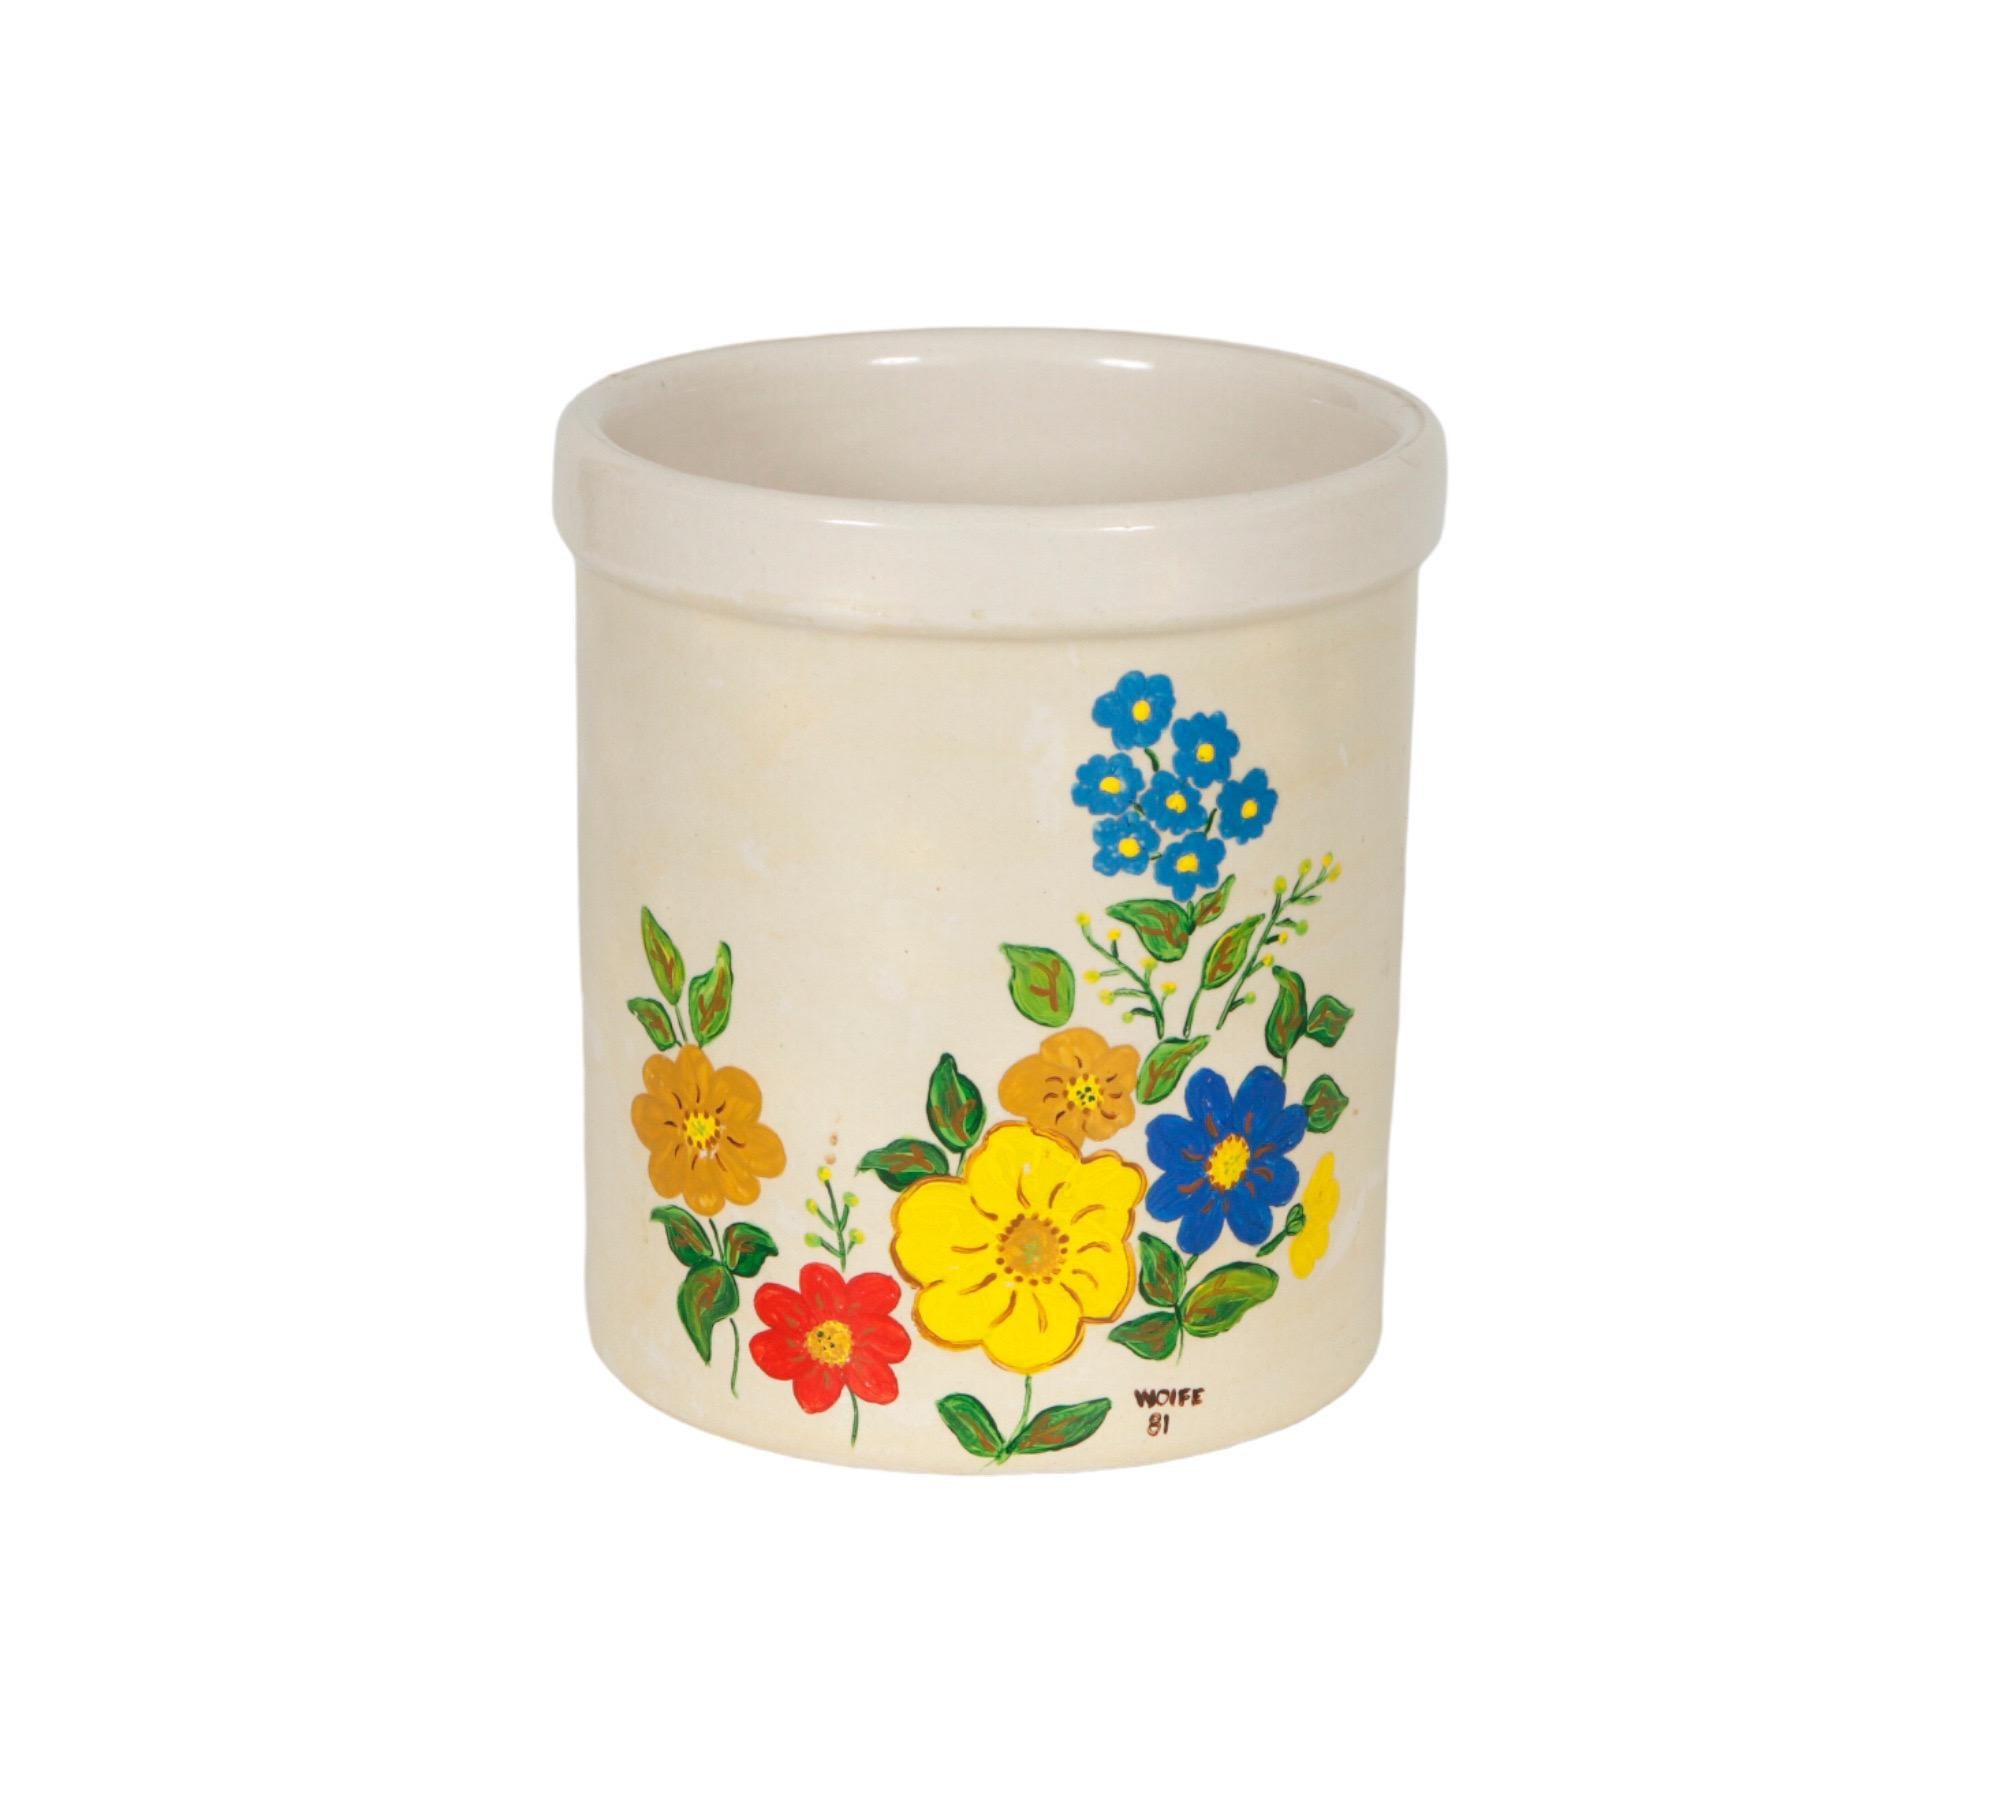 A hand-painted stoneware utensil holder jar. The front side is decorated with simple flowers in primary colors over a beige base. Signed Wolfe ‘81.
